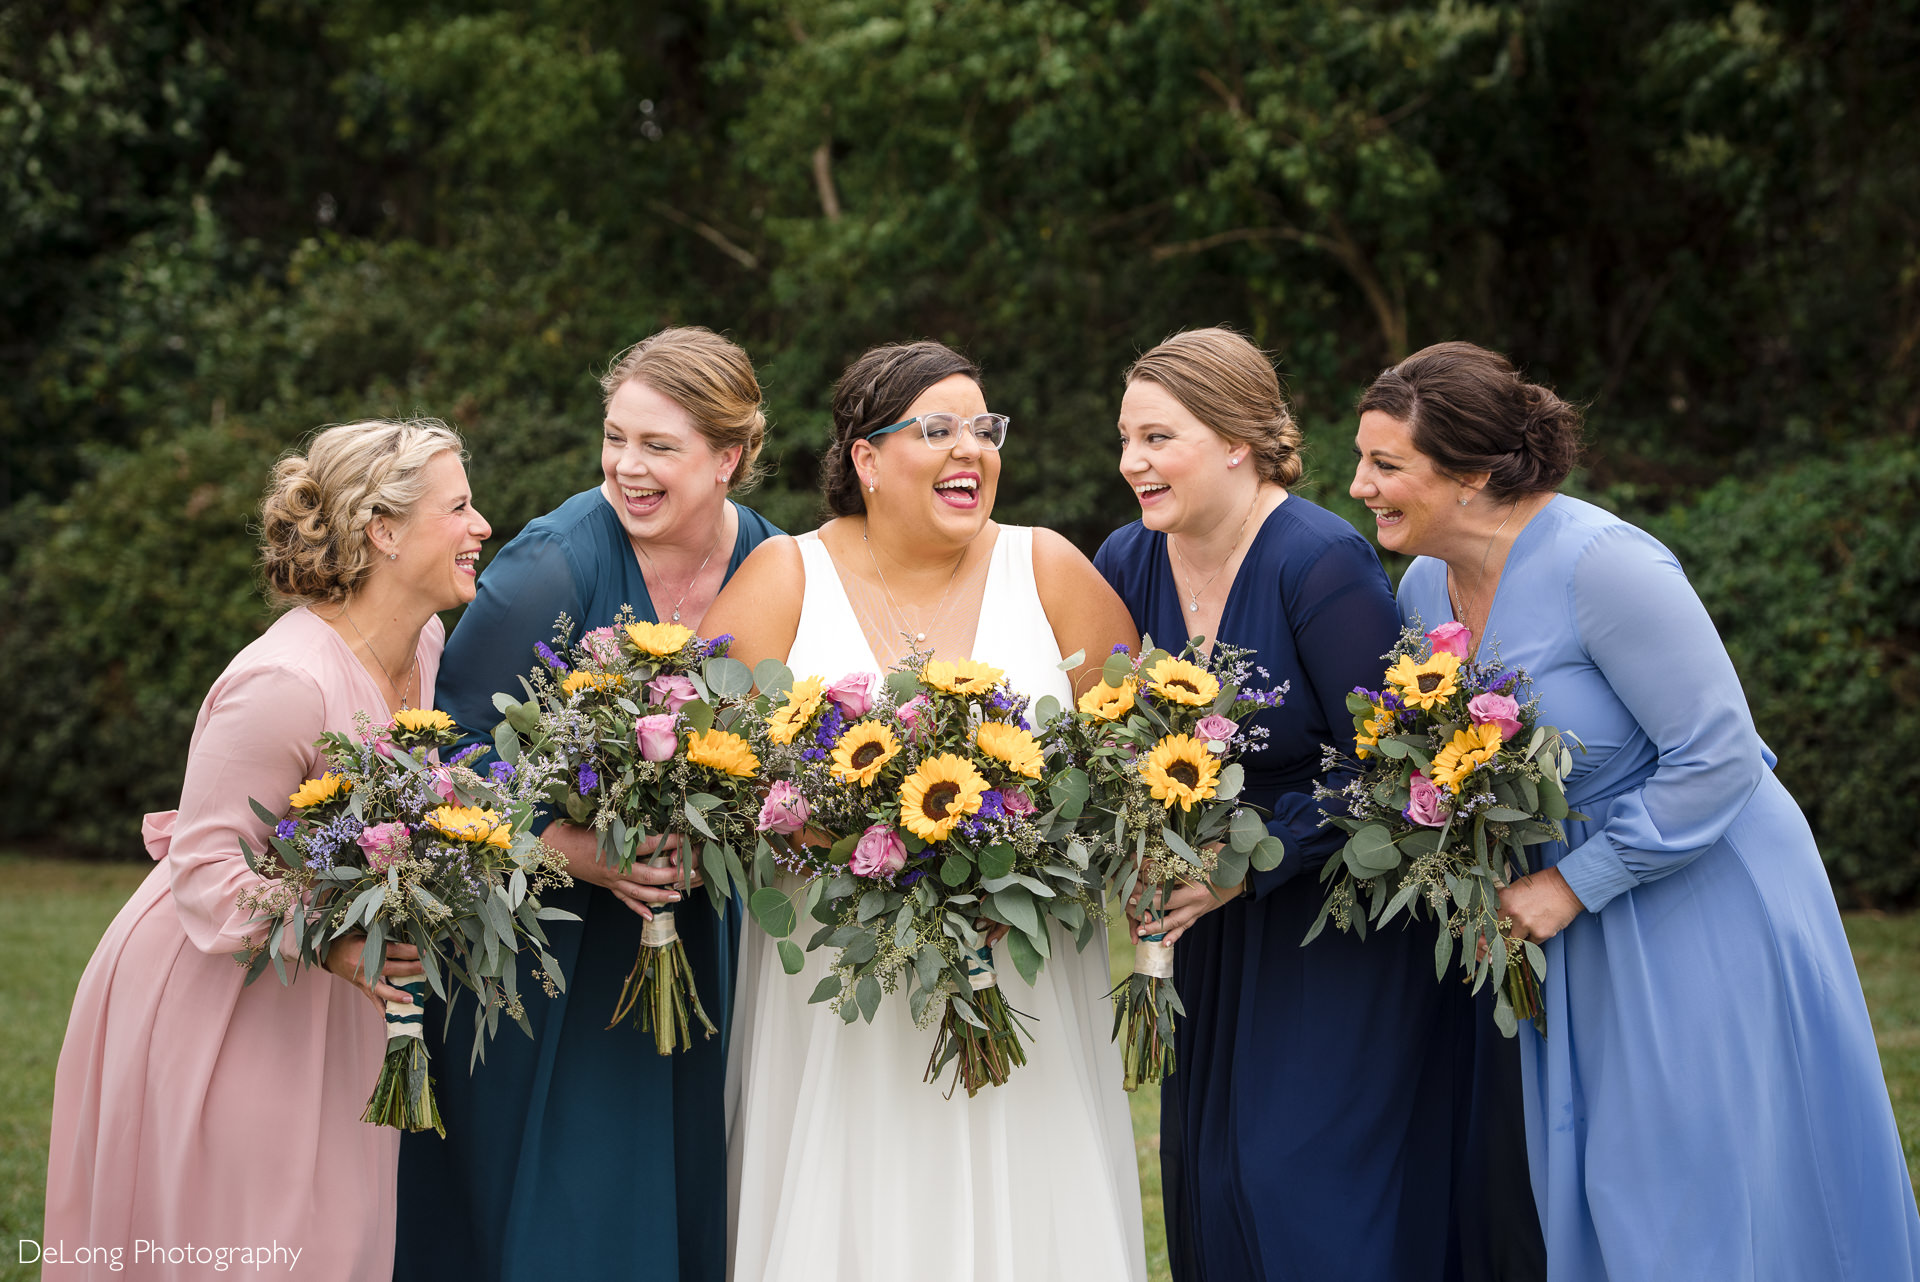 Bride laughing with her bridesmaids holding colorful bouquets and dresses at the Island House in Charleston, SC by Charlotte Wedding Photographers DeLong Photography